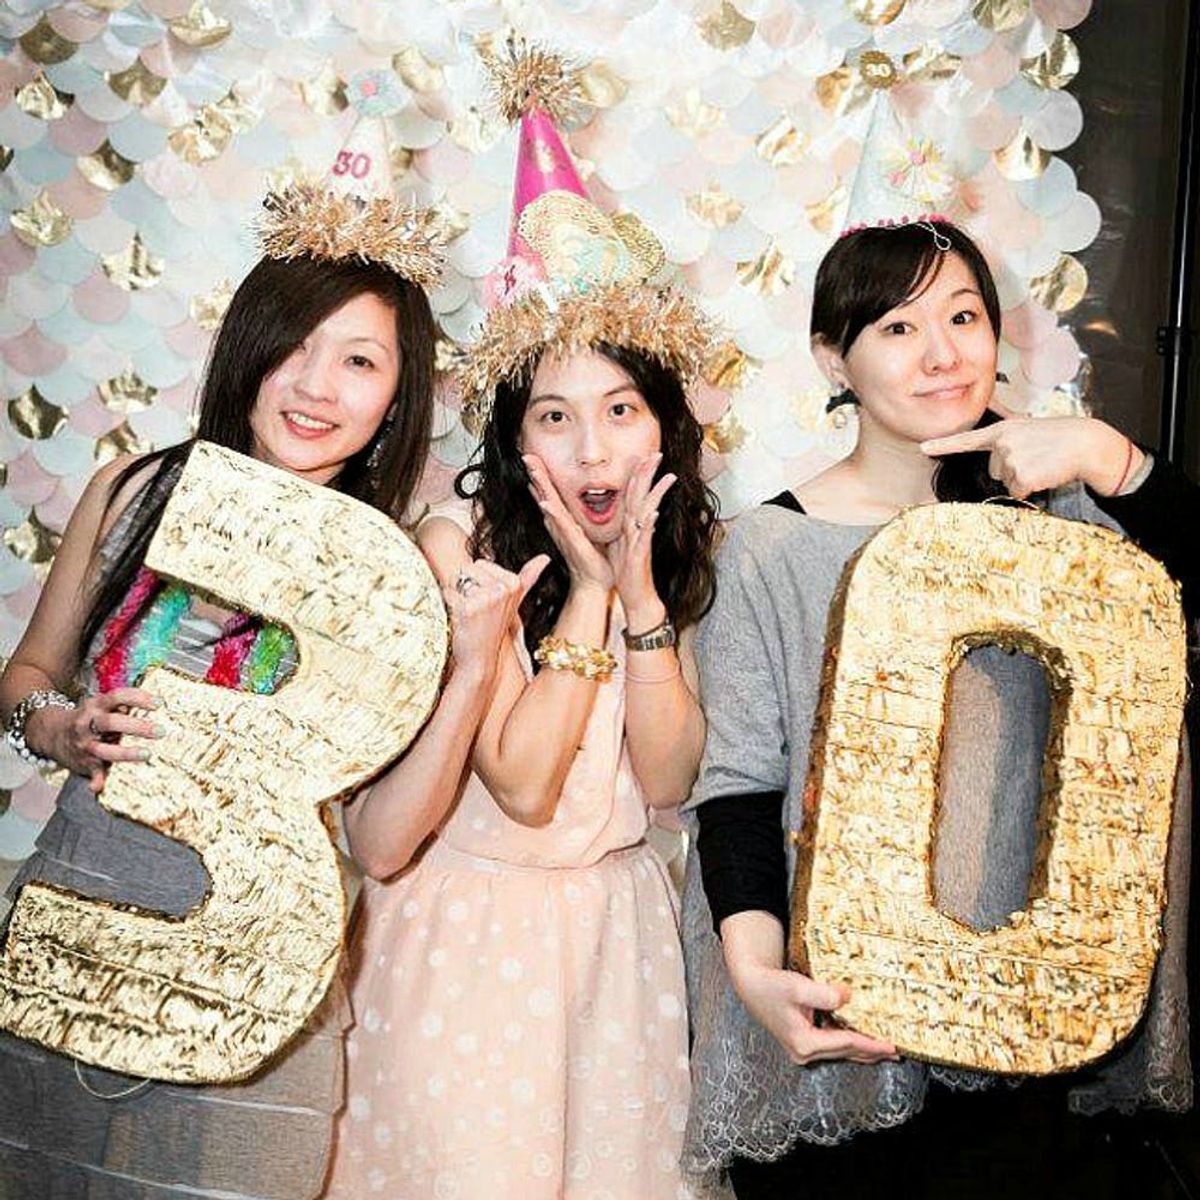 13 Decorations for Your 30th Birthday Party